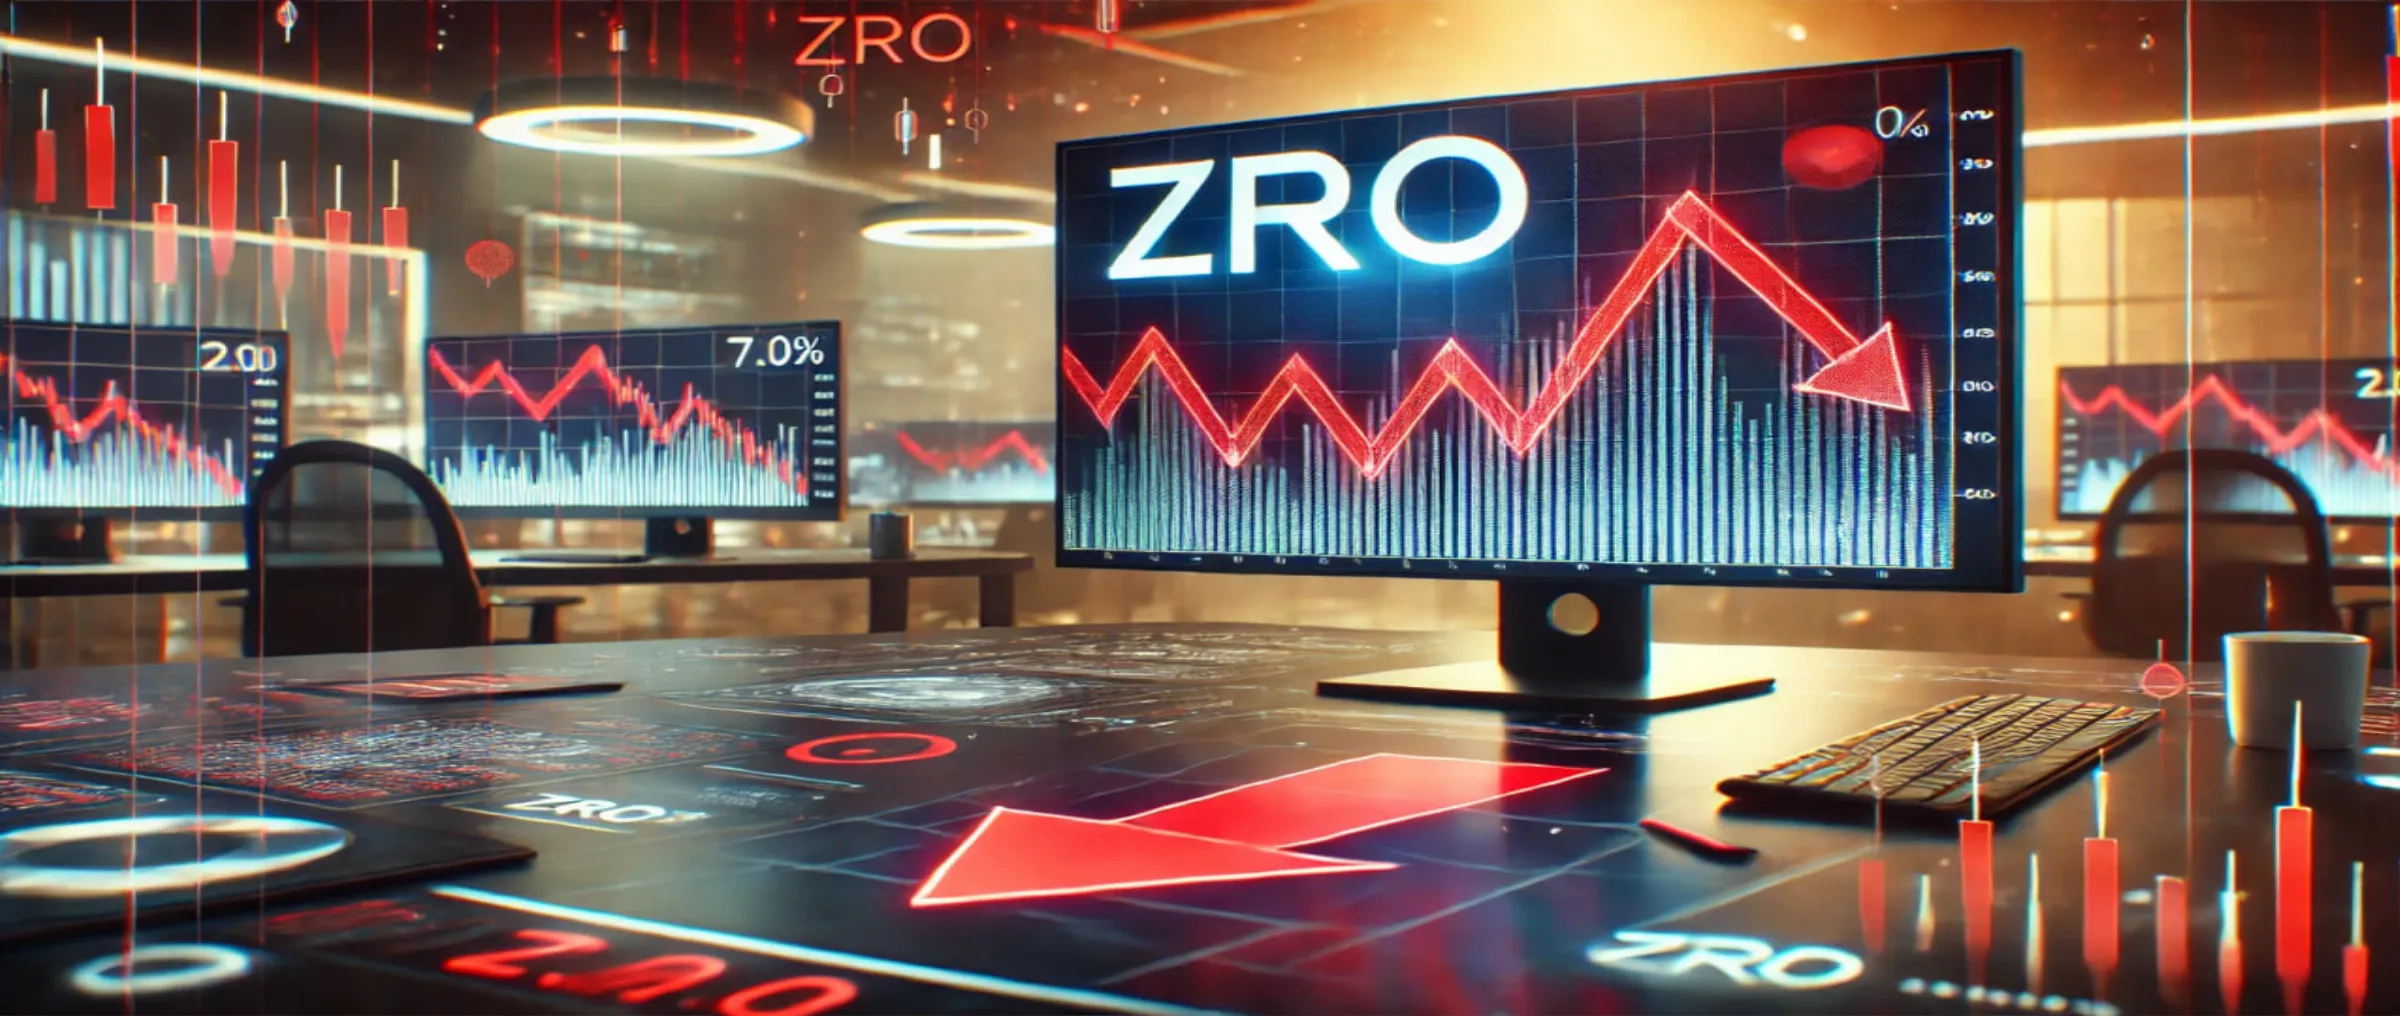 LayerZero implements controversial "Proof-of-Donation" system: ZRO price drops by 30%